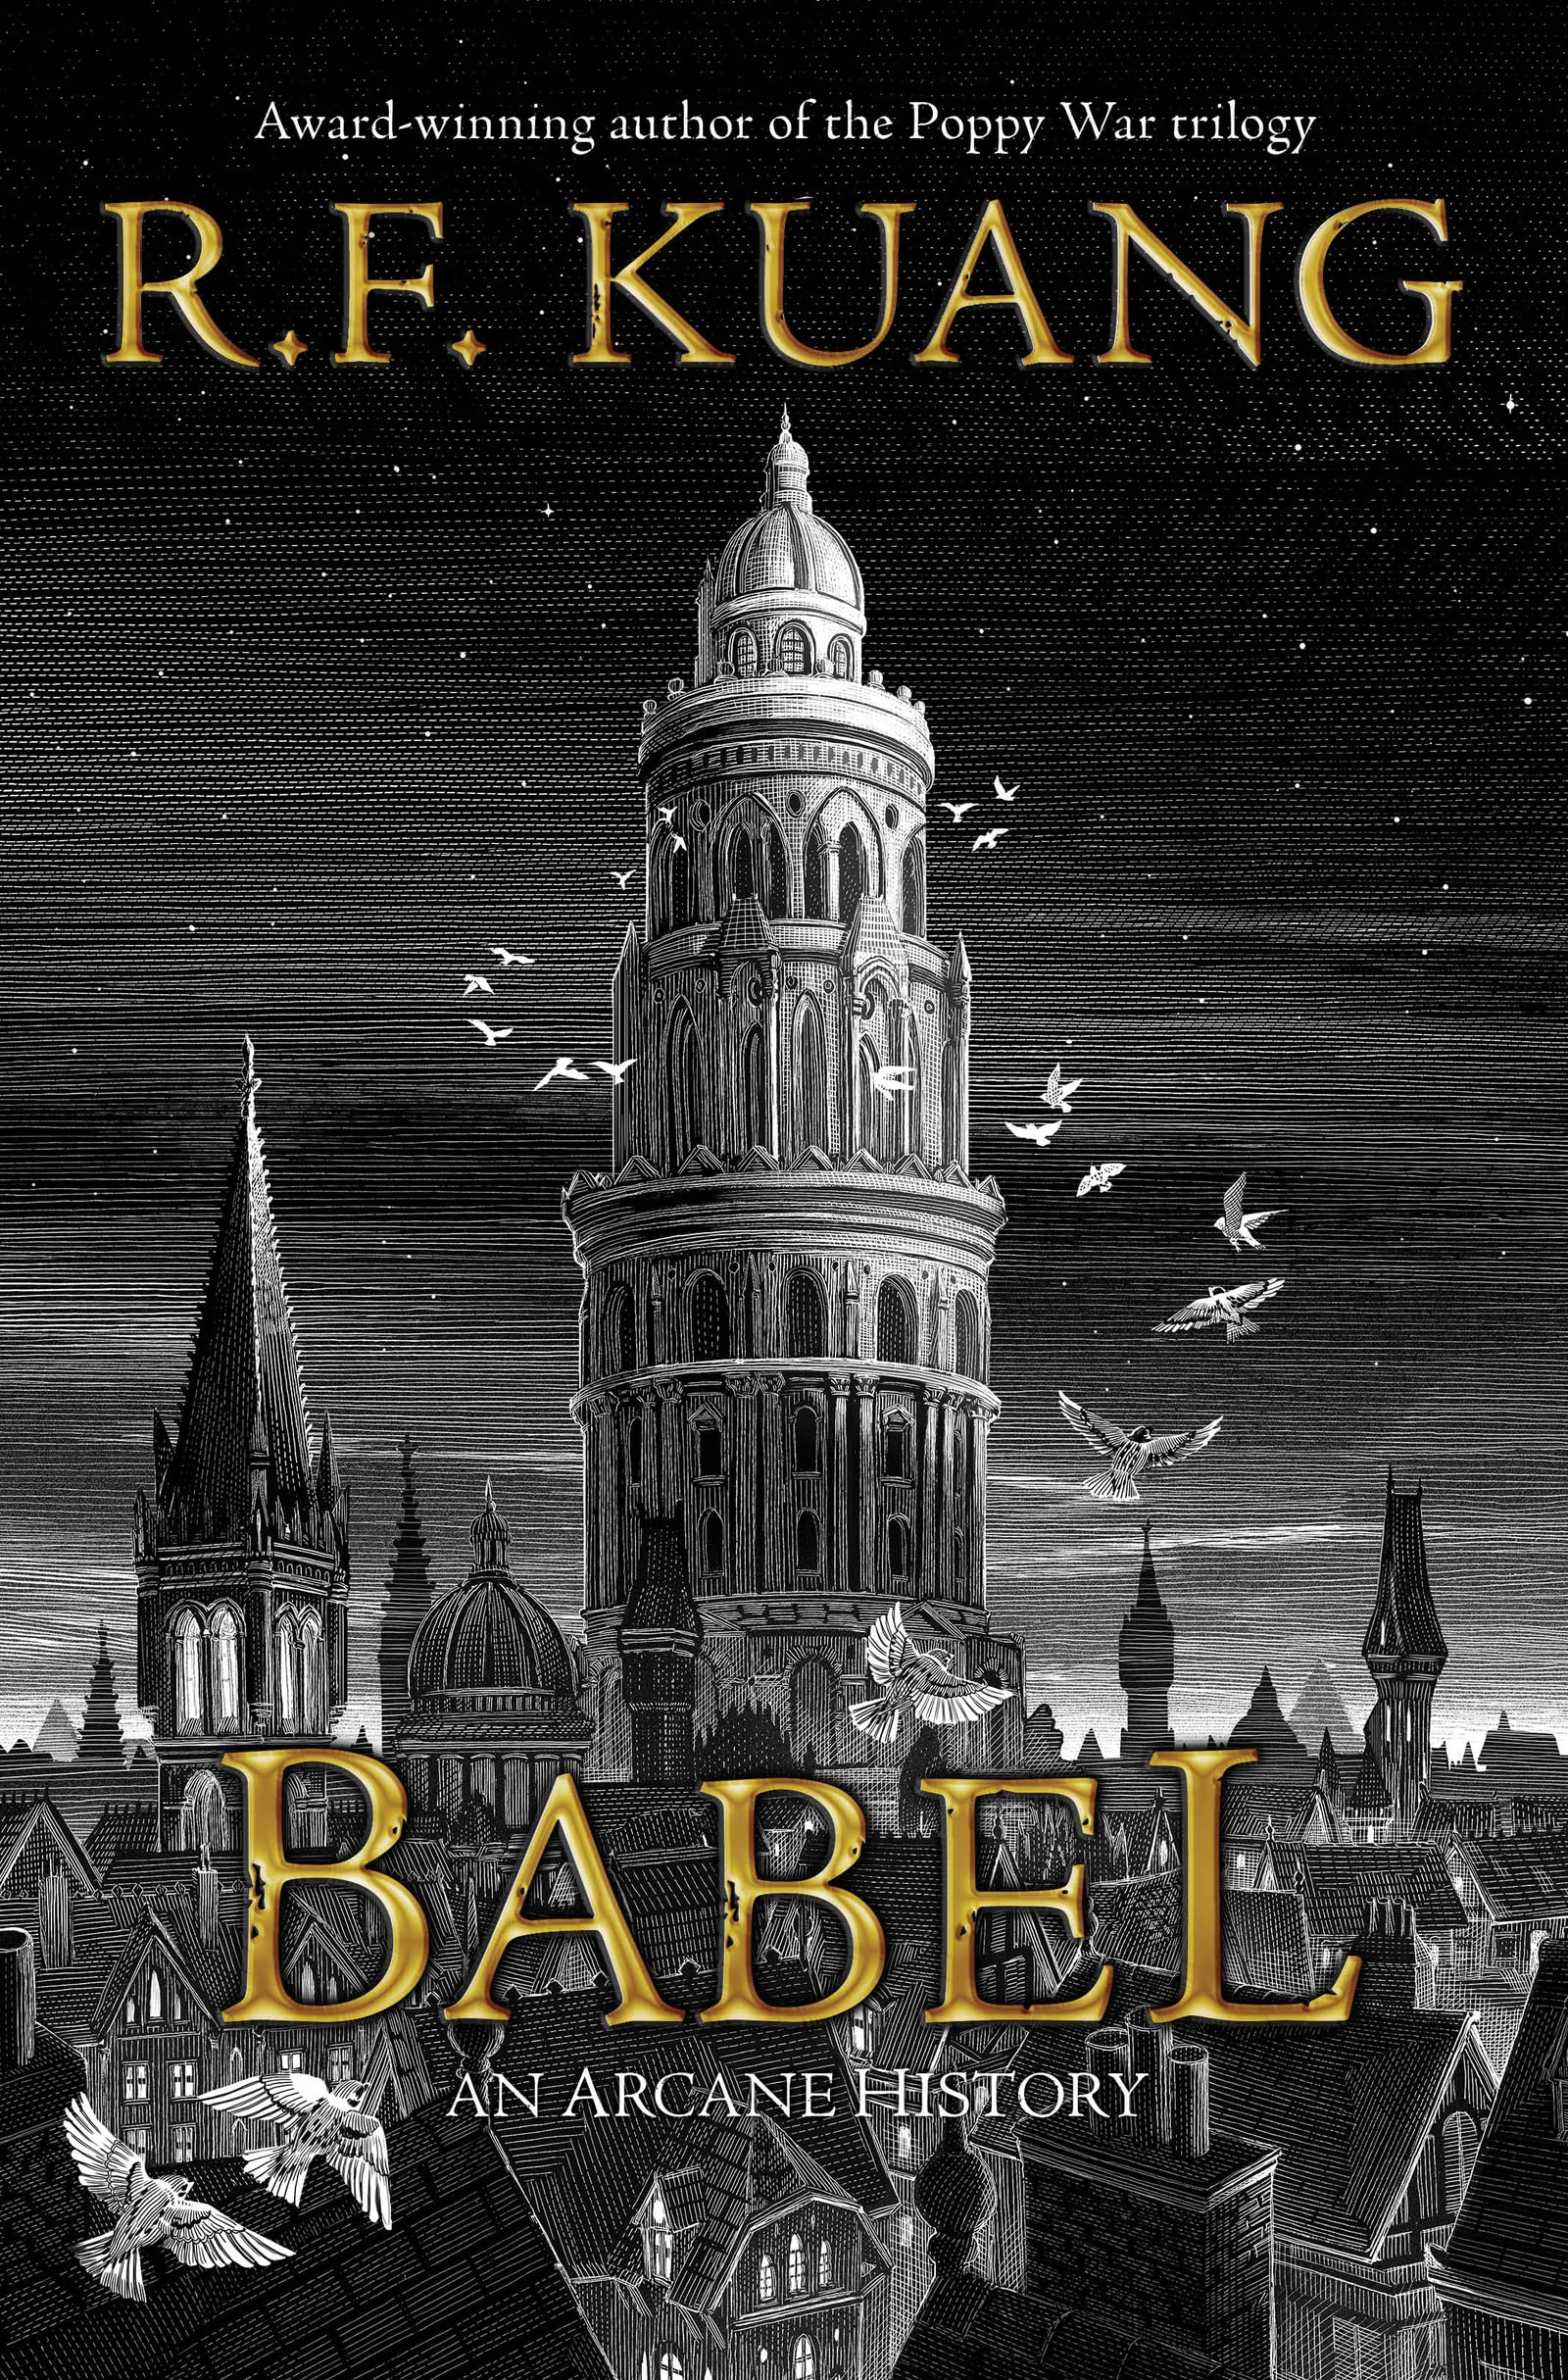 Cover image for Babel by R.F. Kuang